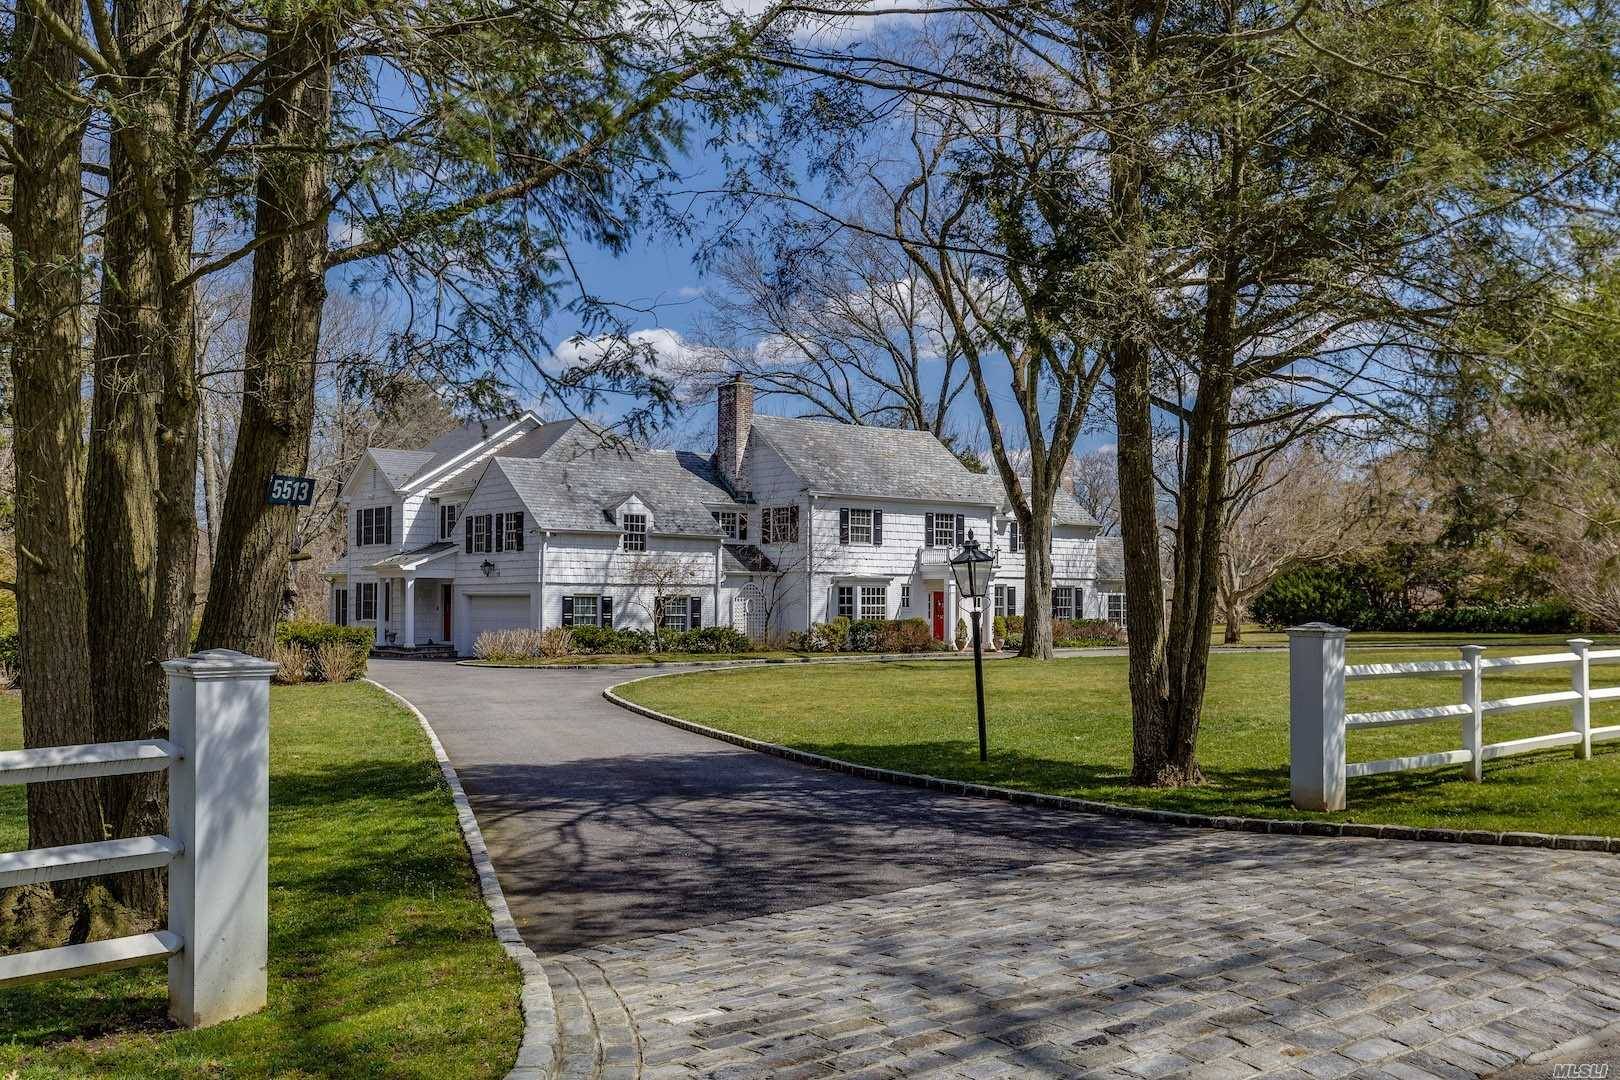 Set On A Beautiful Country Lane Cul De Sac's Sits This Classic Walter Uhl Colonial.